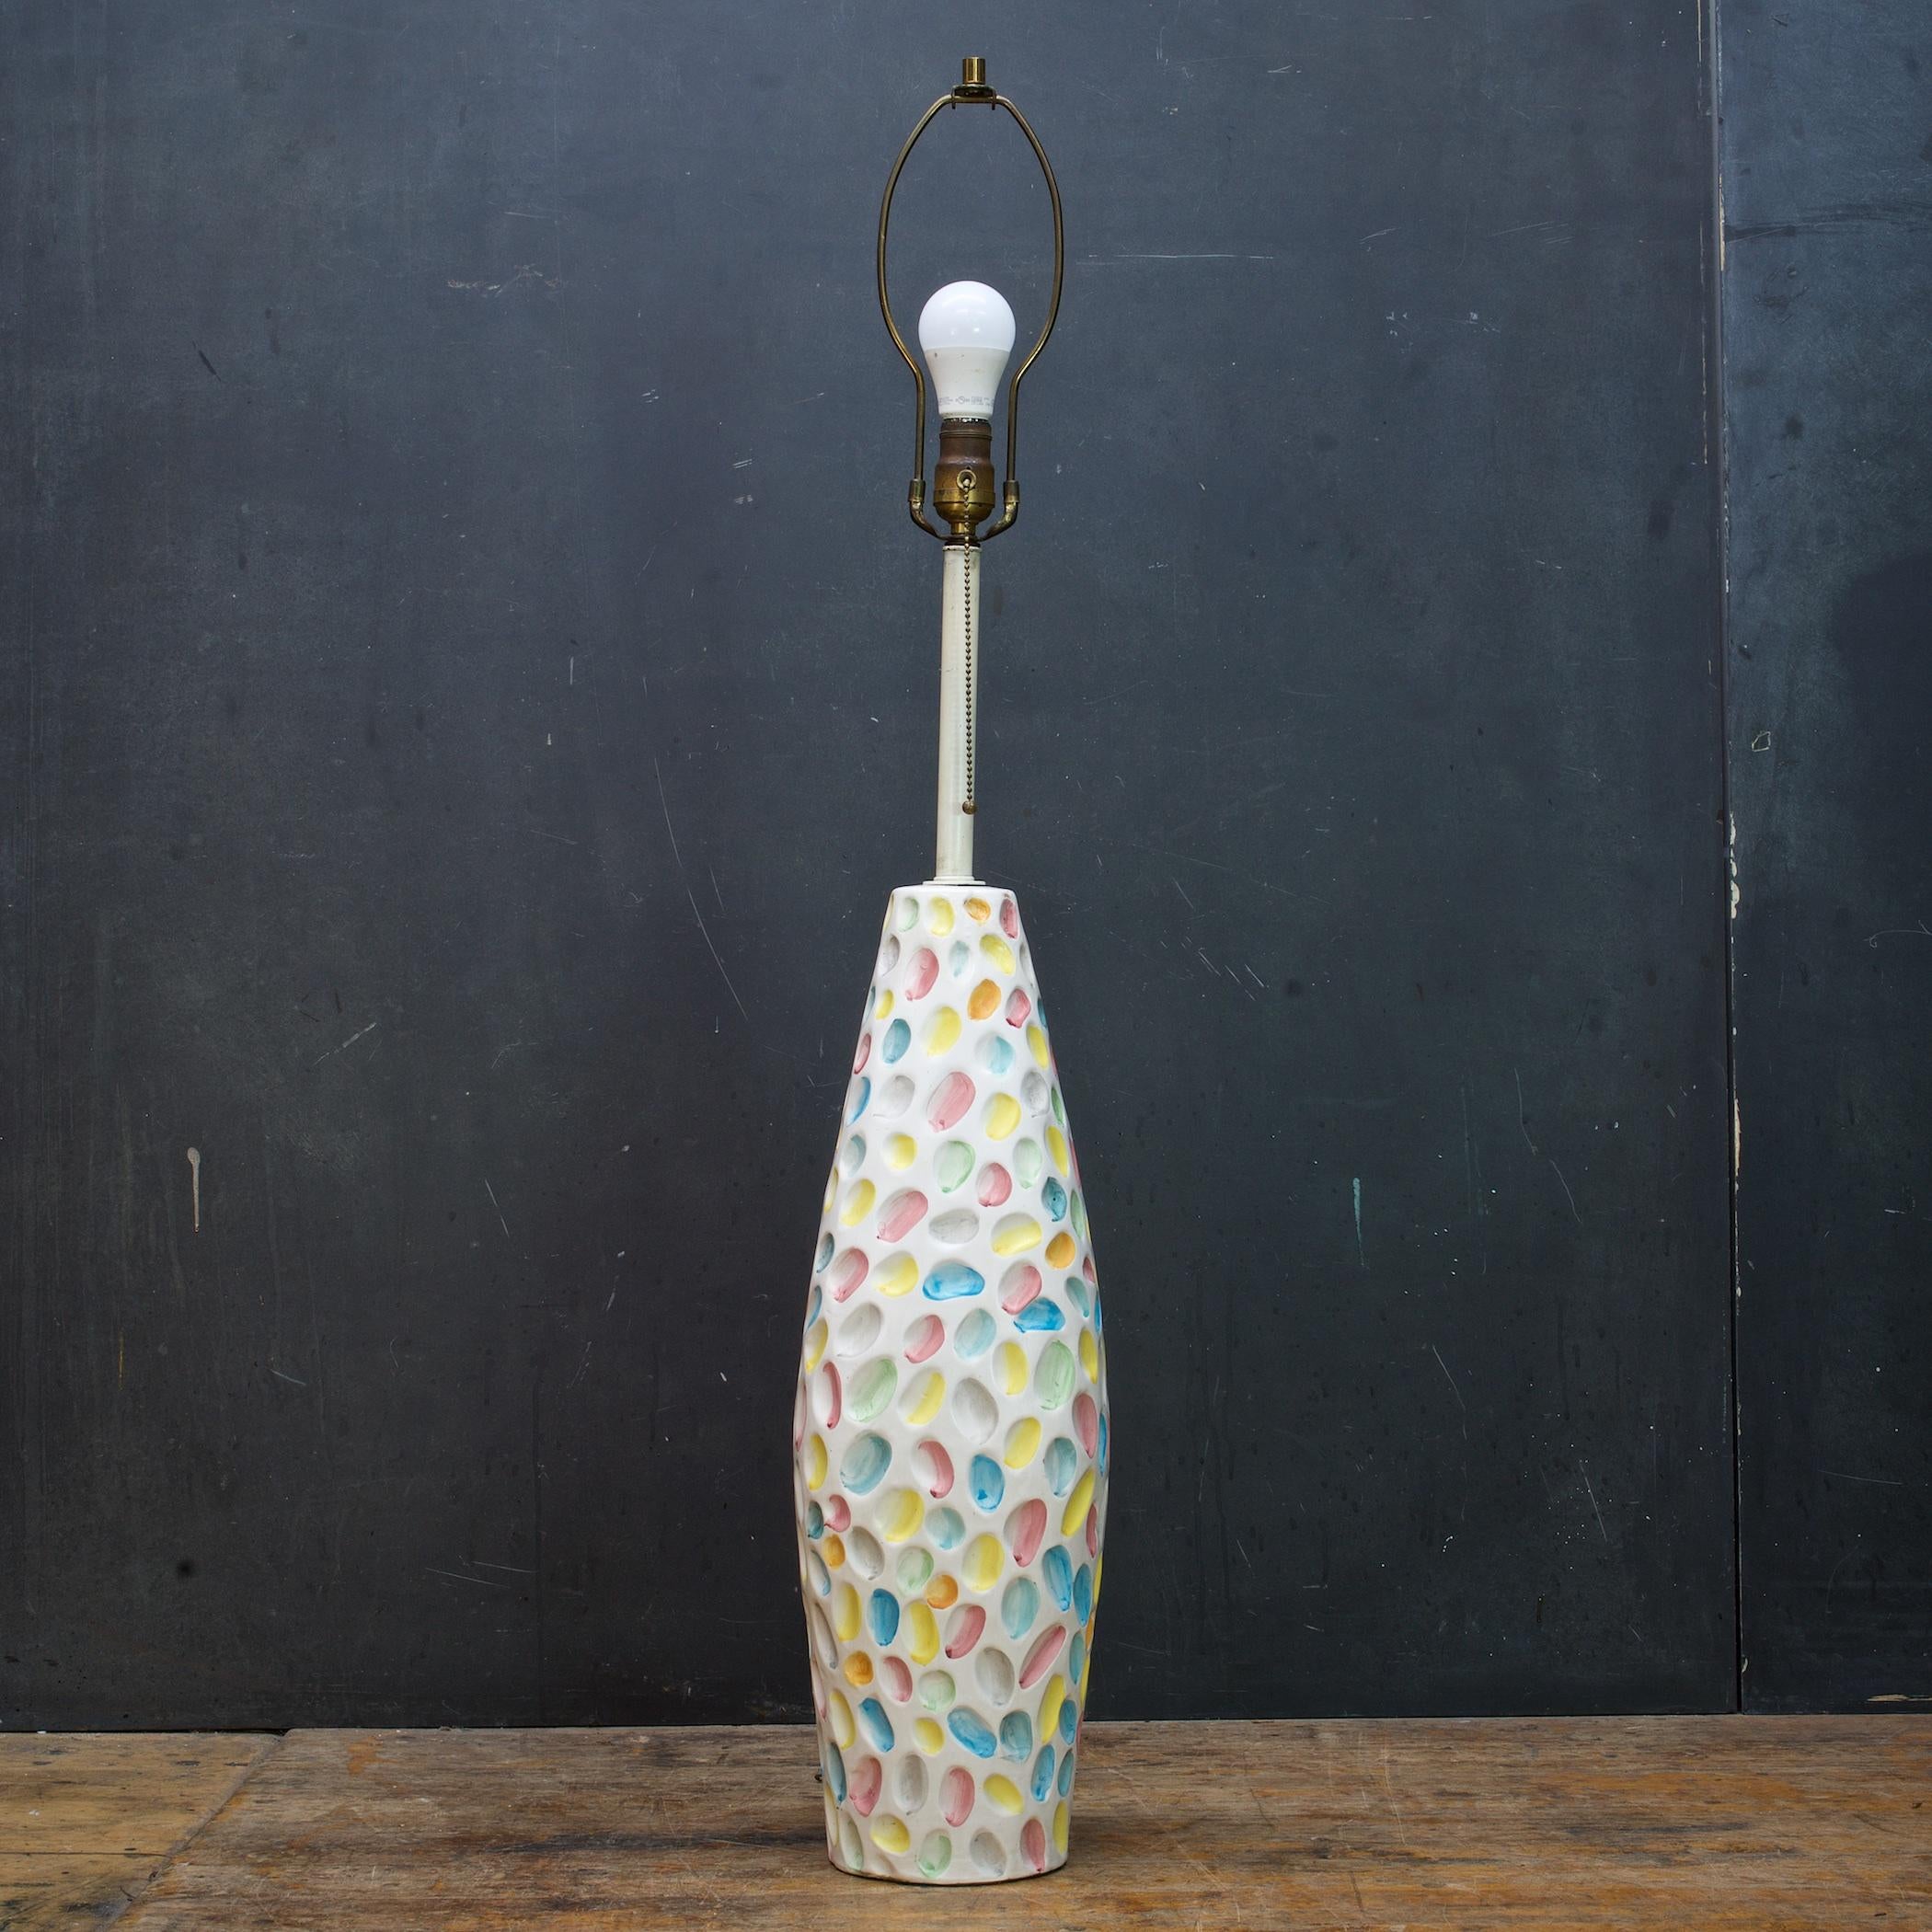 A few flecks to the glaze, but that is it this lamp is incredible, you will love it, so colorful and whimsical. A fully functional lamp. Shade not included, soiled.

Lamp Body Only W 7 x D 7 x H 23.5 in.
Total Lamp H 43.5 in. (20.25